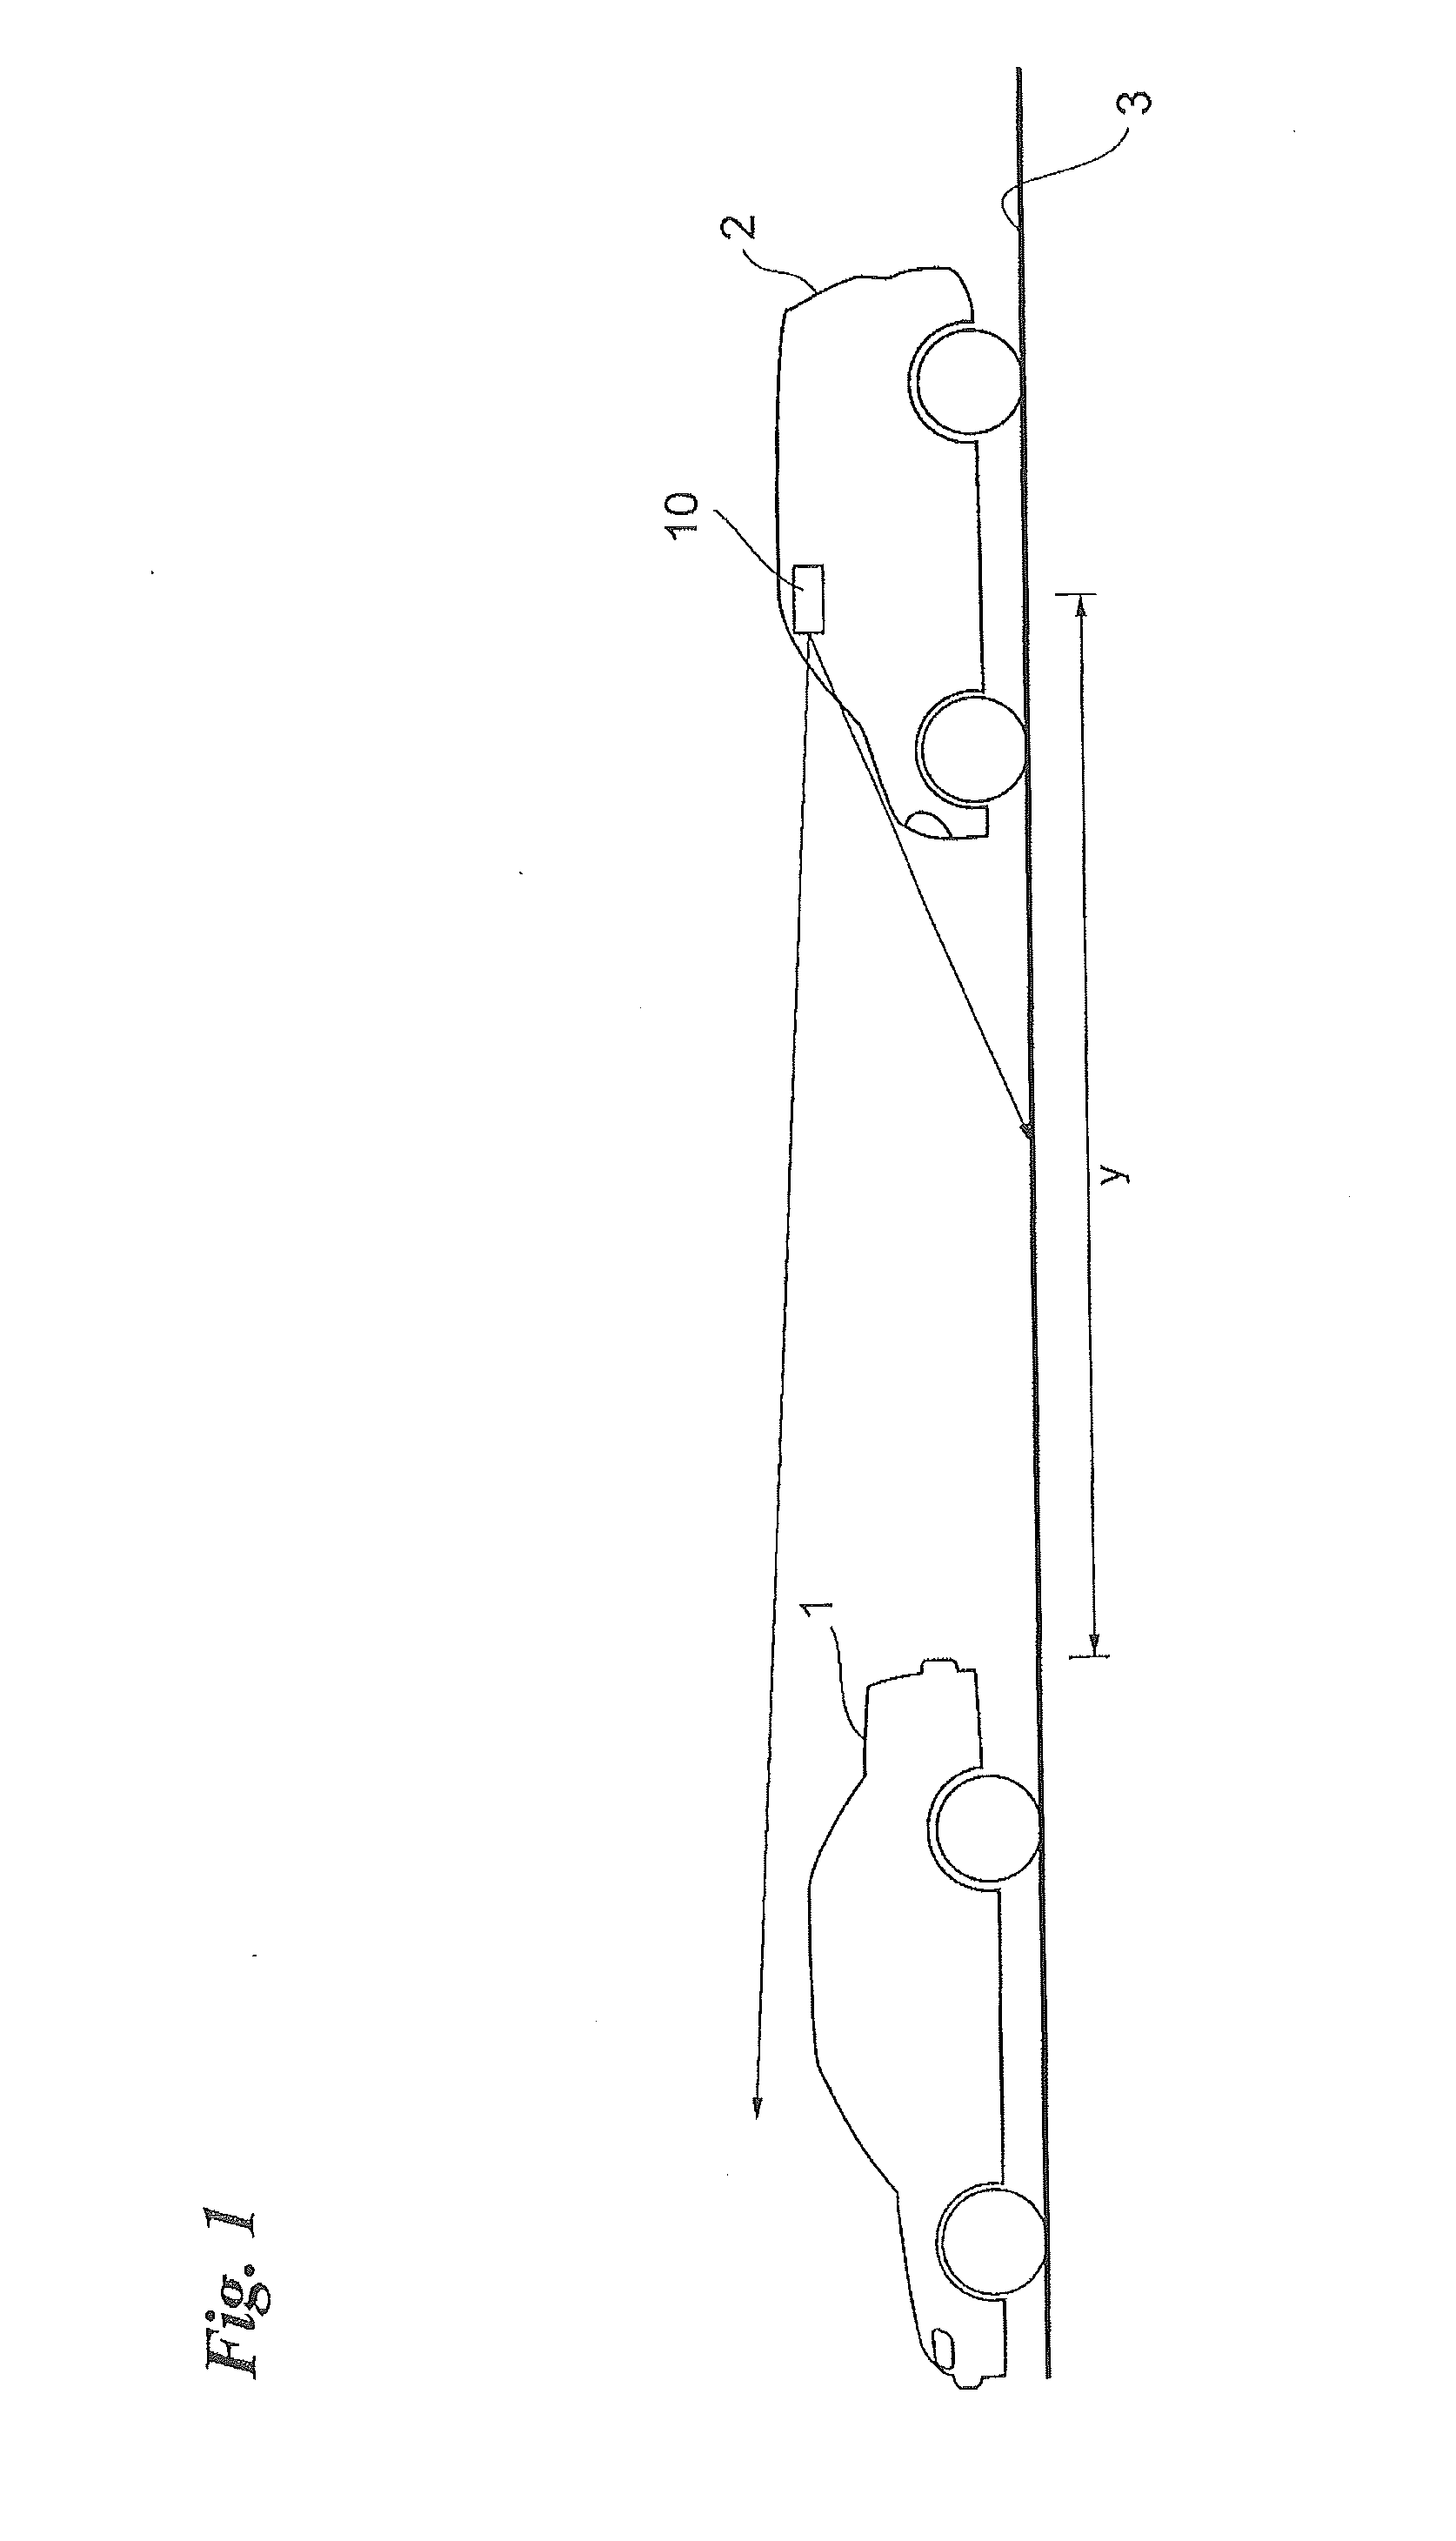 Vehicle-to-vehicle distance calculation apparatus and method